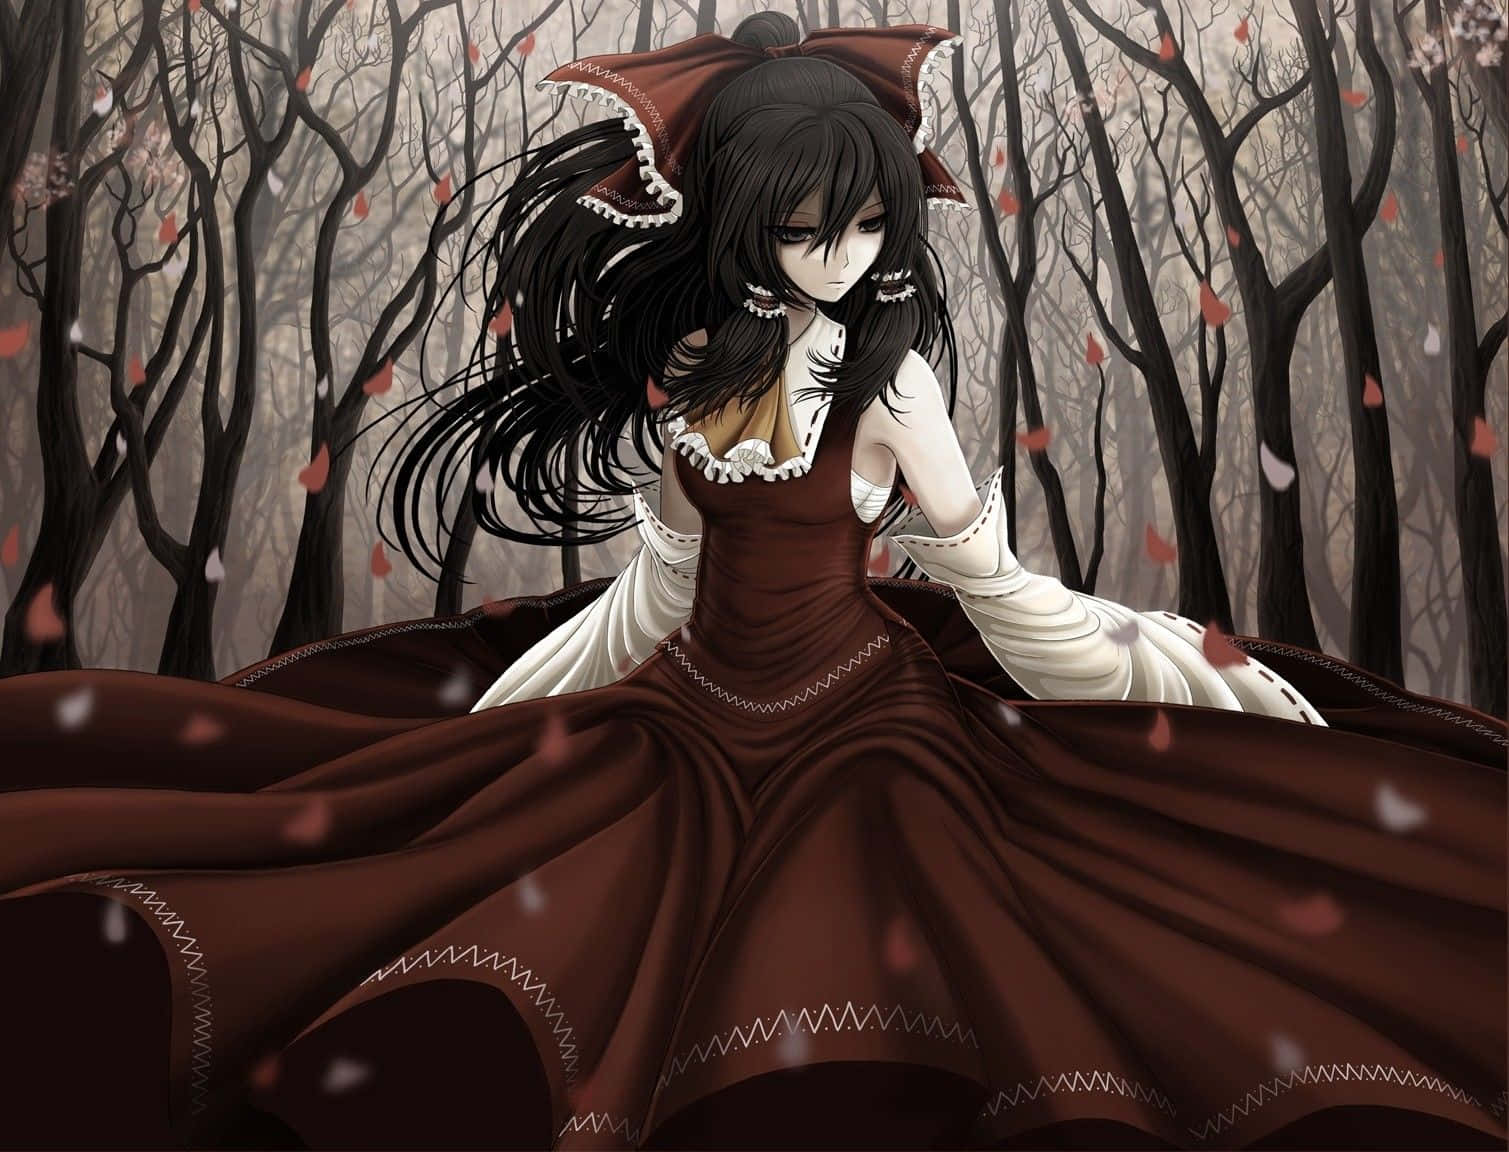 A slightly gothic but beautiful anime girl Wallpaper